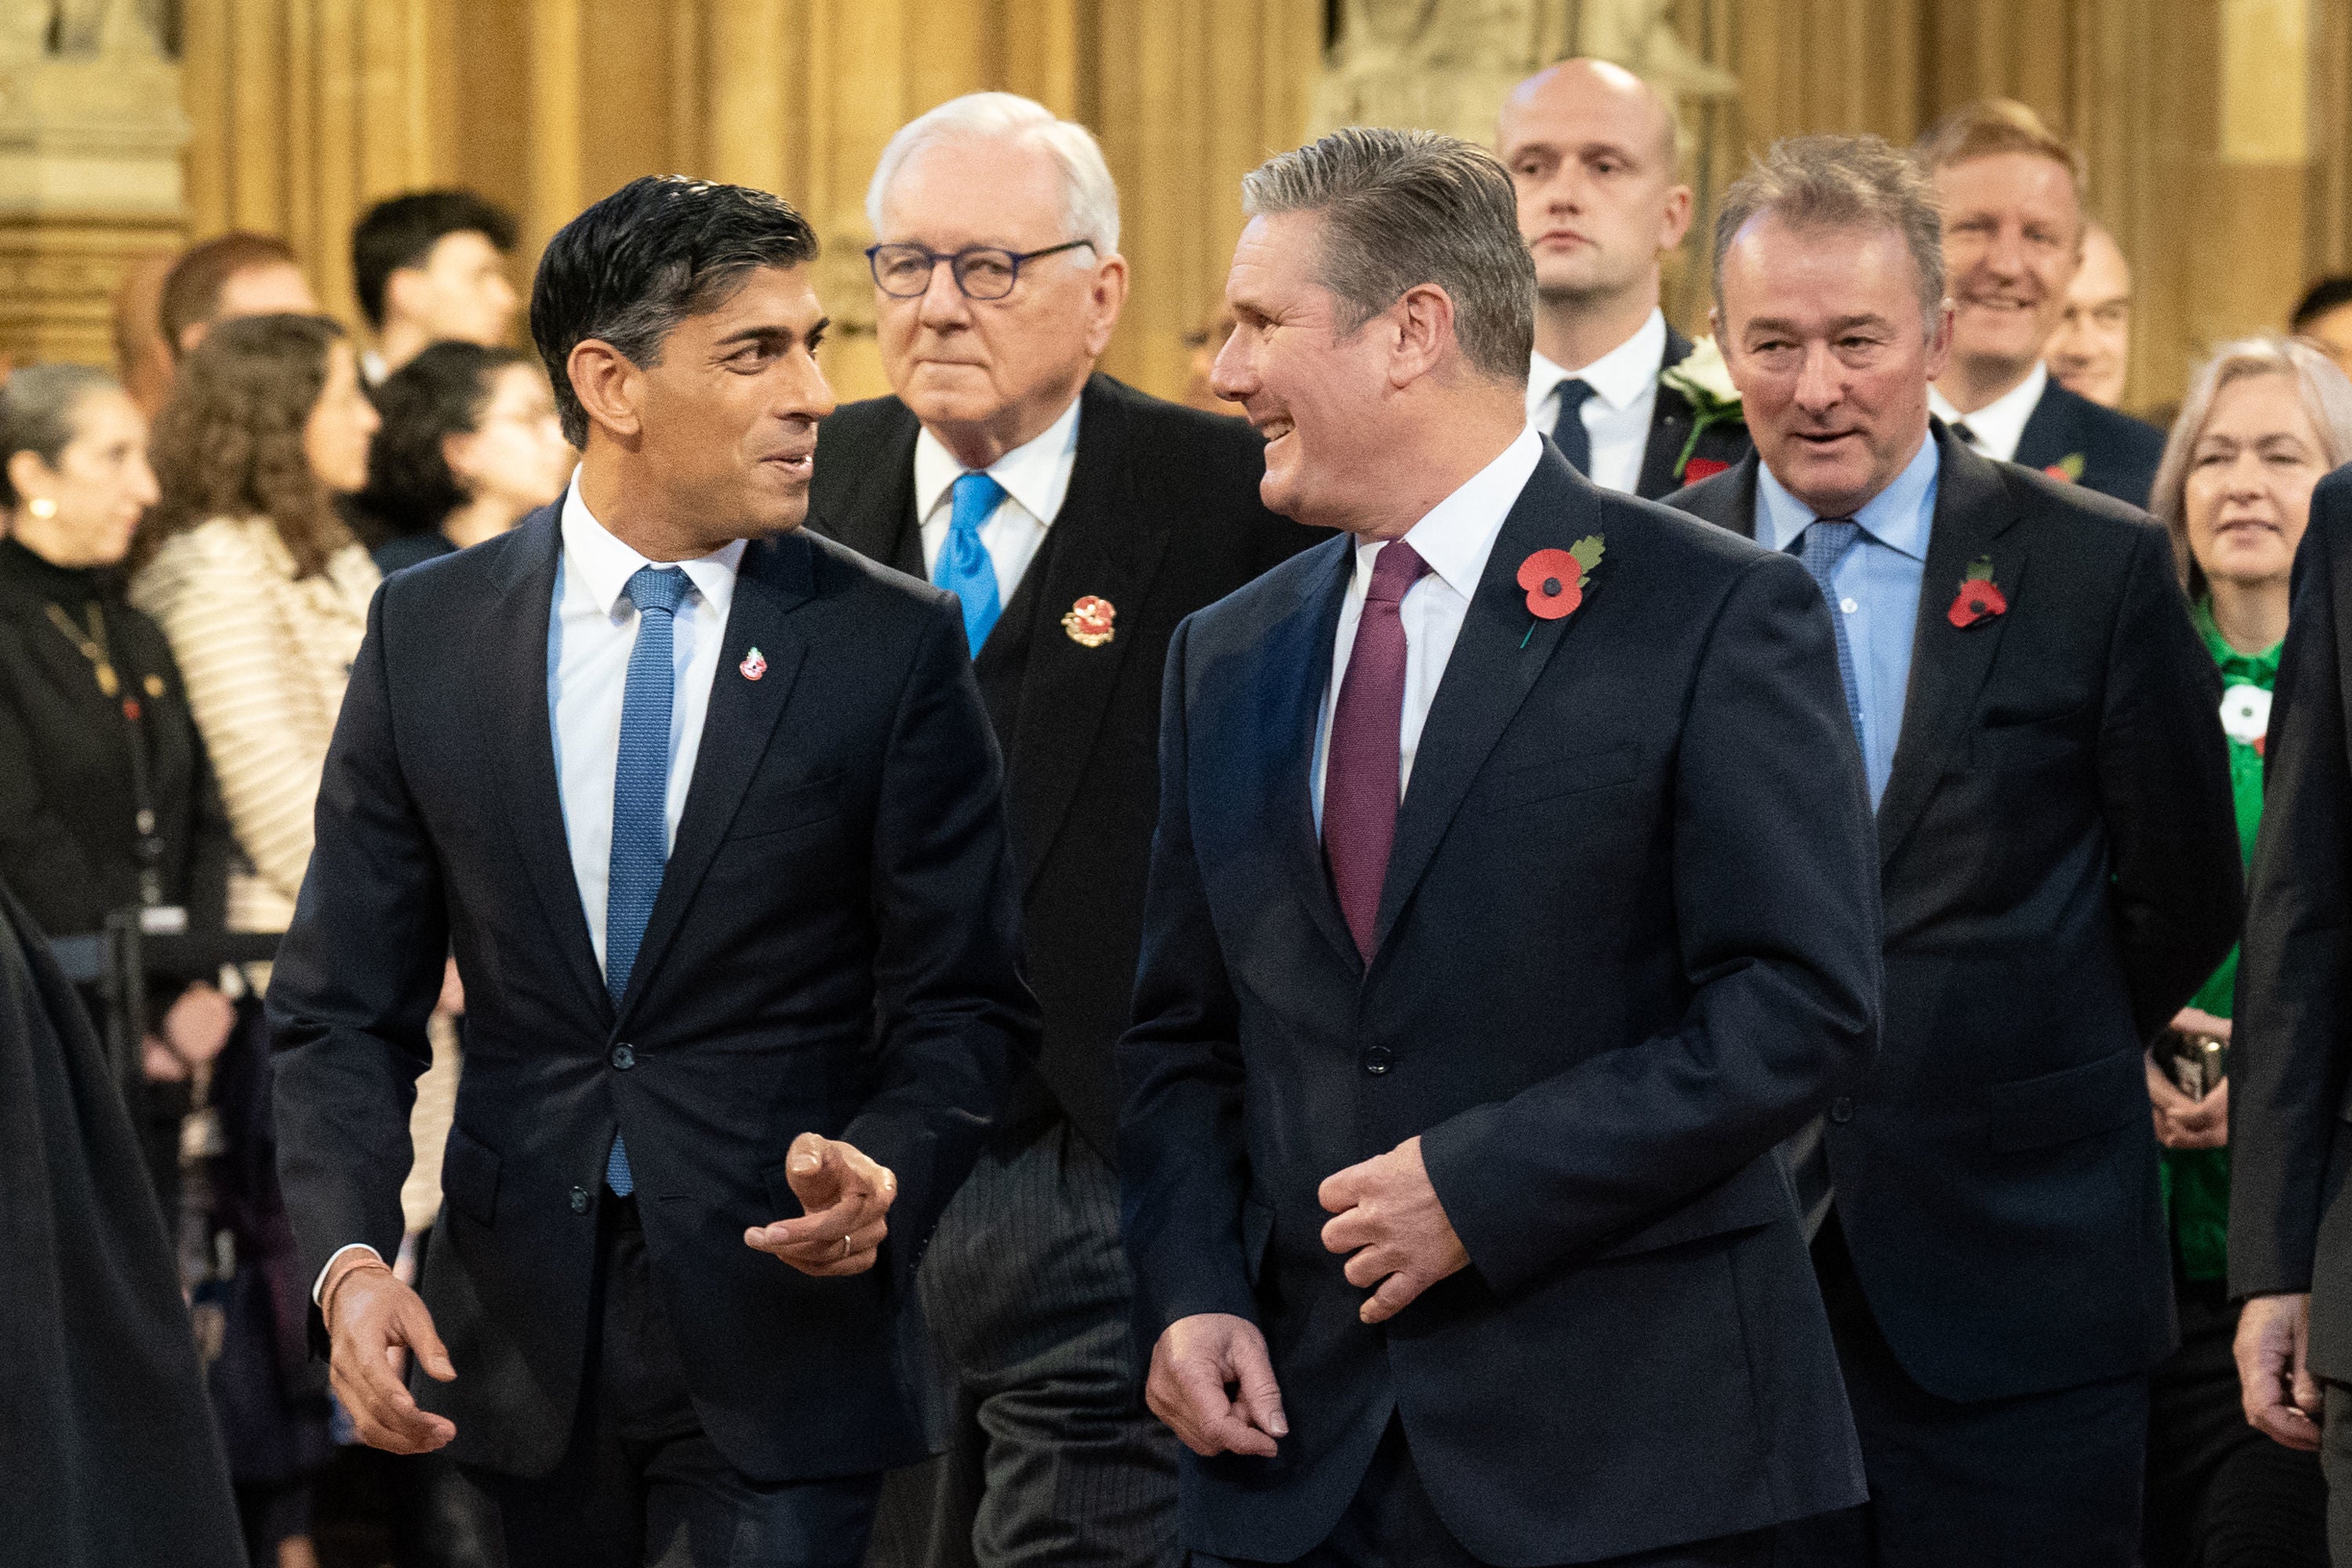 Rishi Sunak and Keir Starmer walk through the Central Lobby at the Palace of Westminster before the King’s Speech on Tuesday